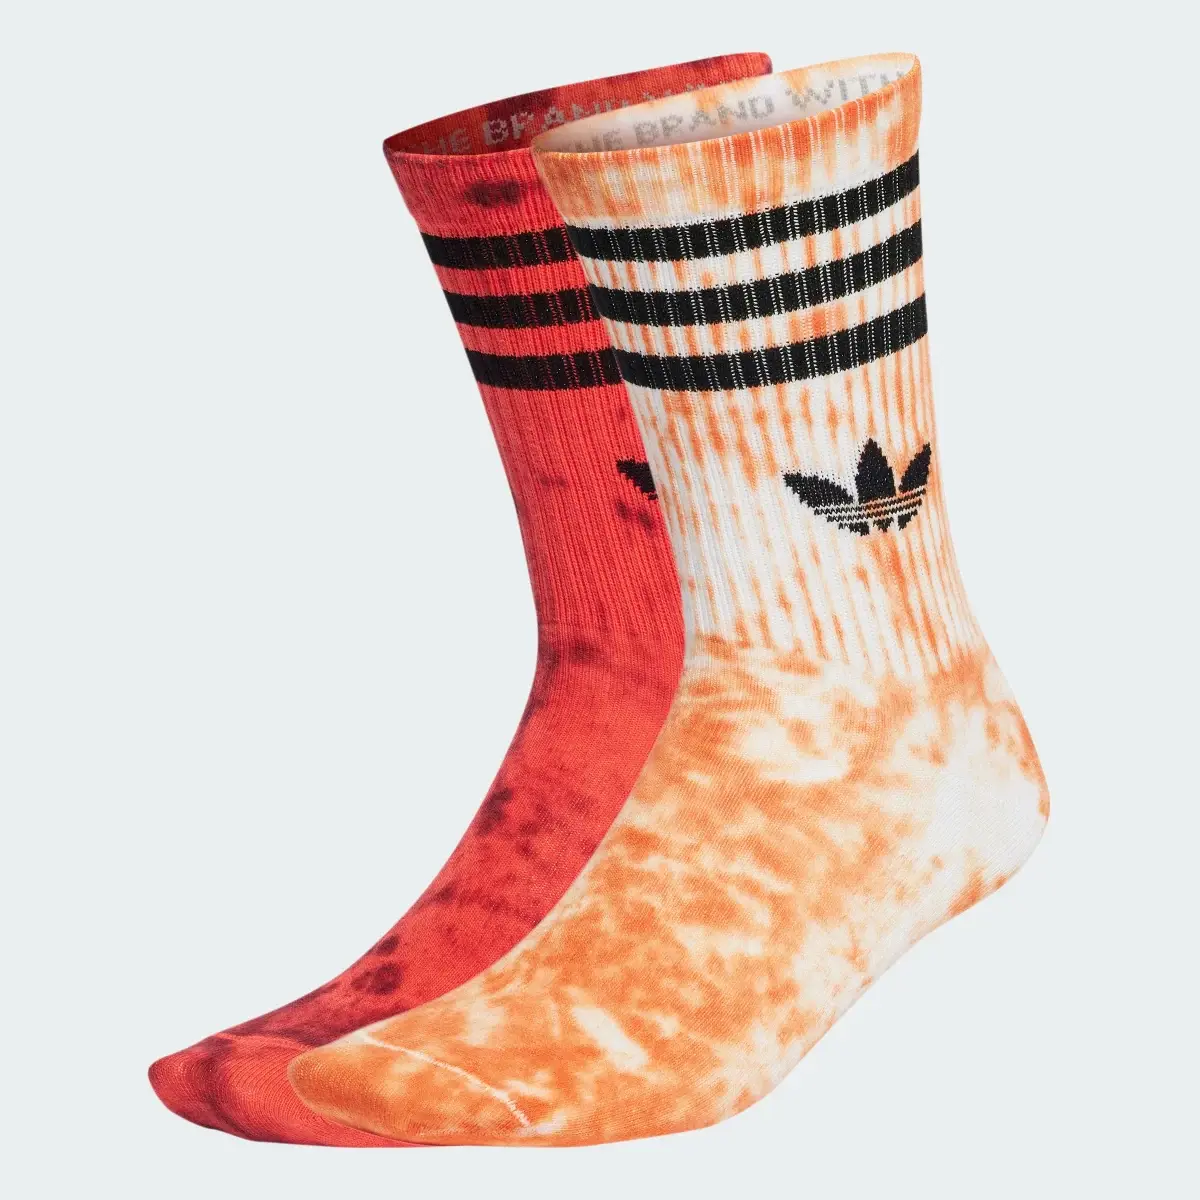 Adidas Chaussettes Tie Dye (2 paires). 1